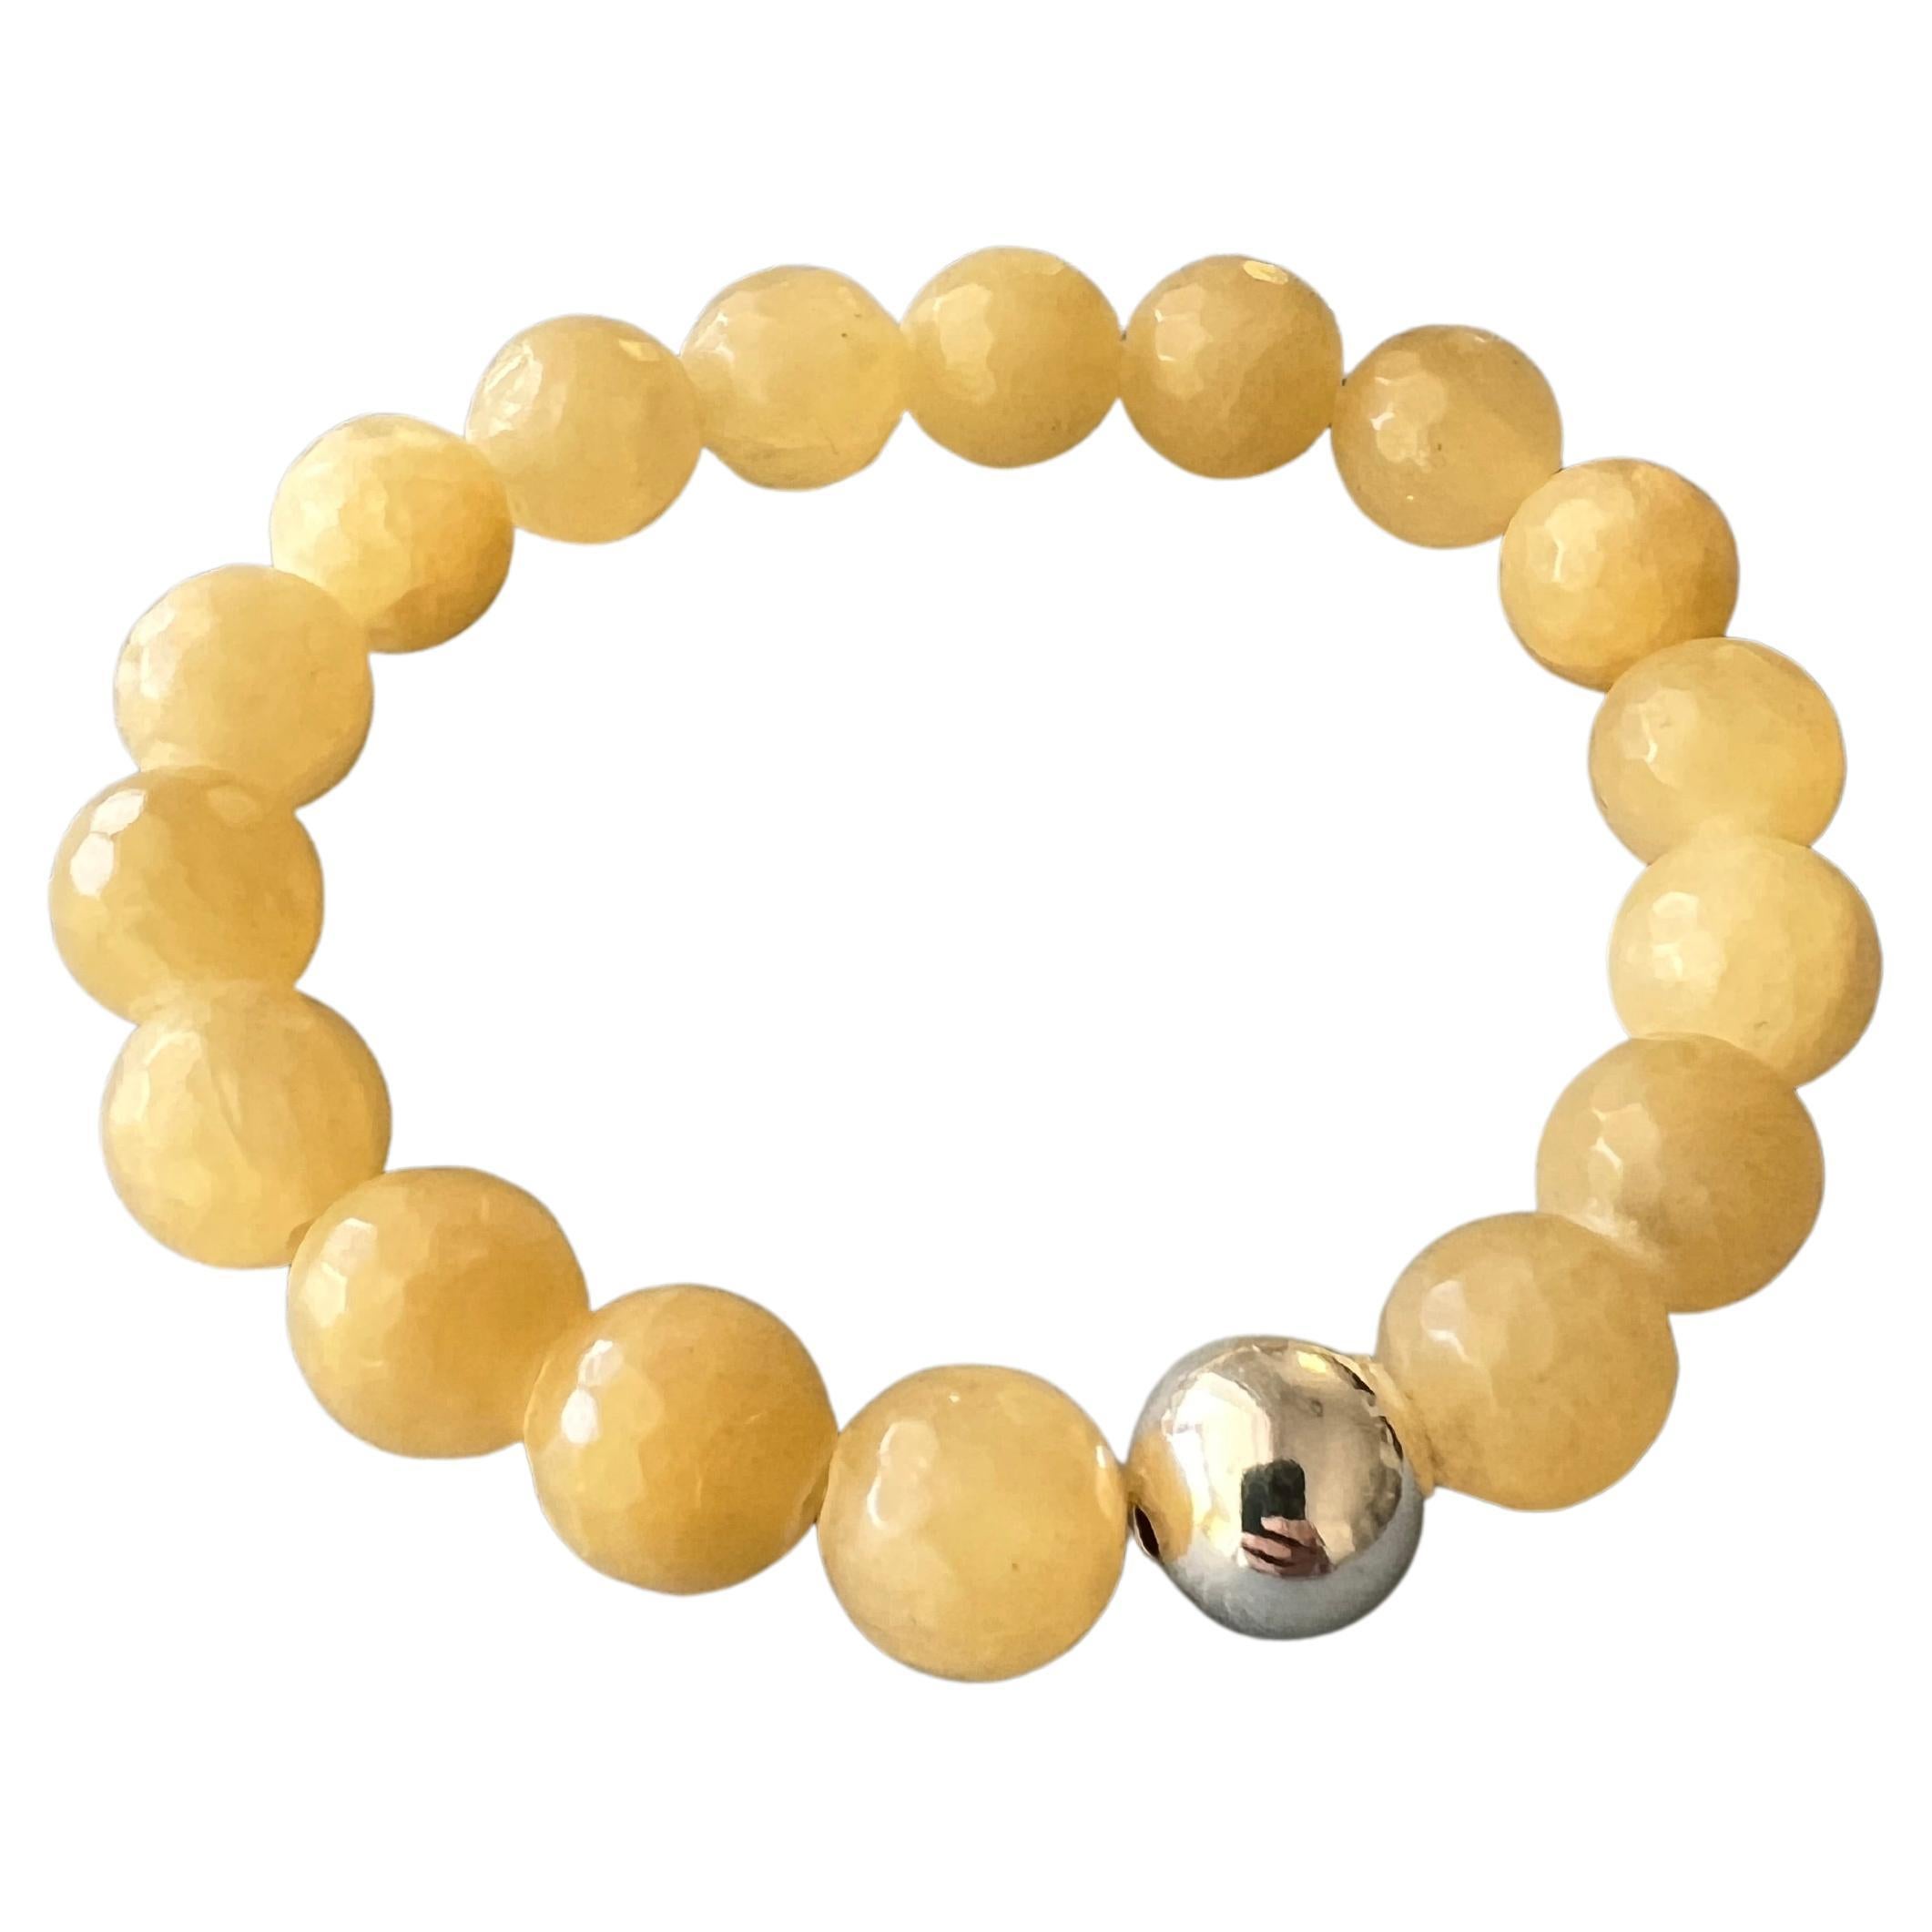 Yellow Calcite Faceted Round Bead Stackable Elastic Bracelet with Silver Bead 

Made in Los Angeles

Designer: J Dauphin

Note: Every bead is in same size.

The Yellow Calcite Round Bead Bracelet offers a subtle aesthetic appeal paired with unique